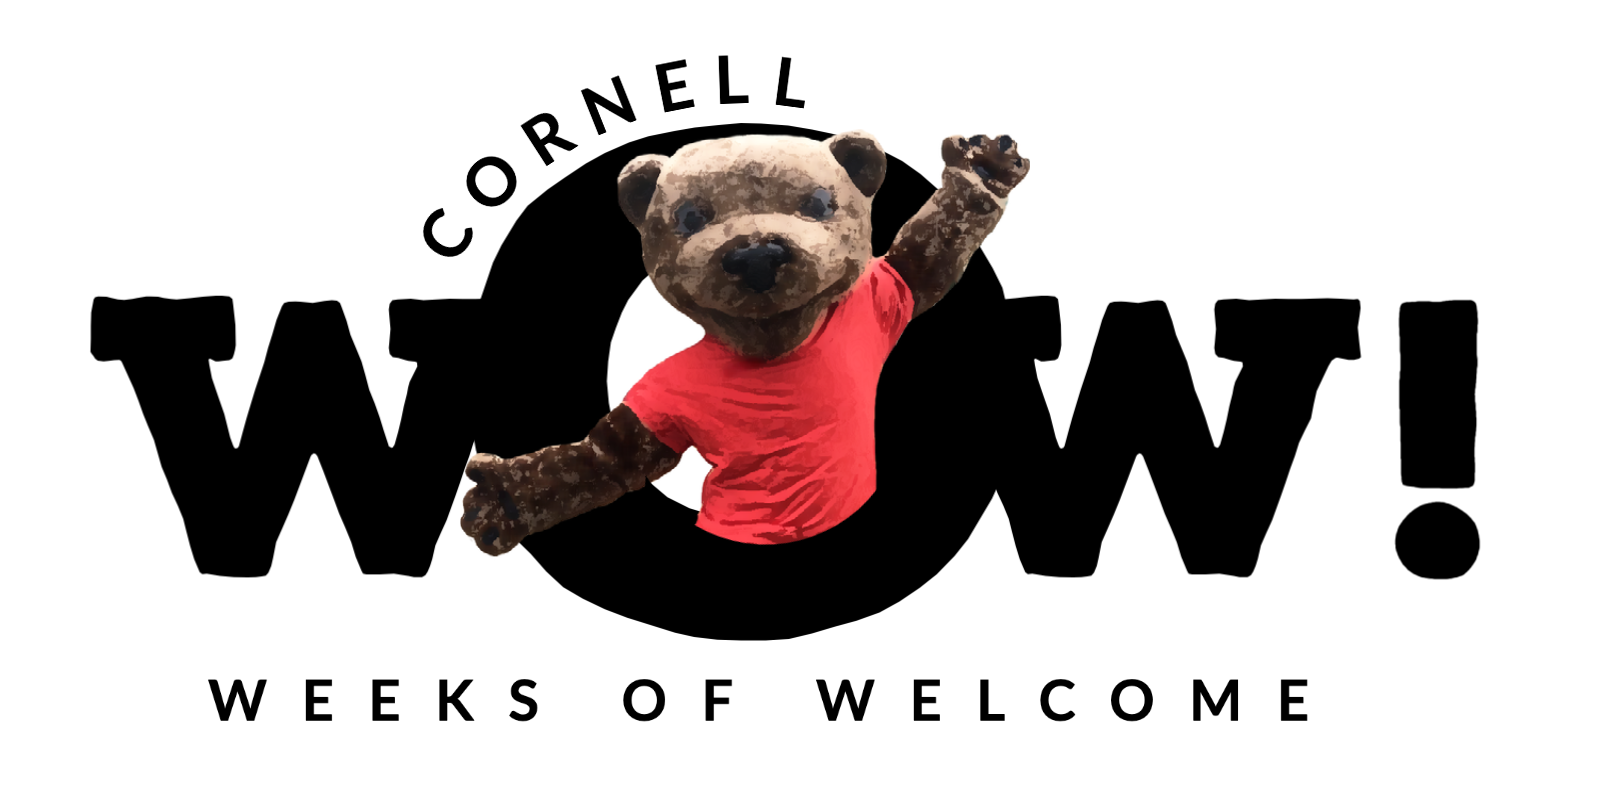 Weeks of Welcome events at Cornell